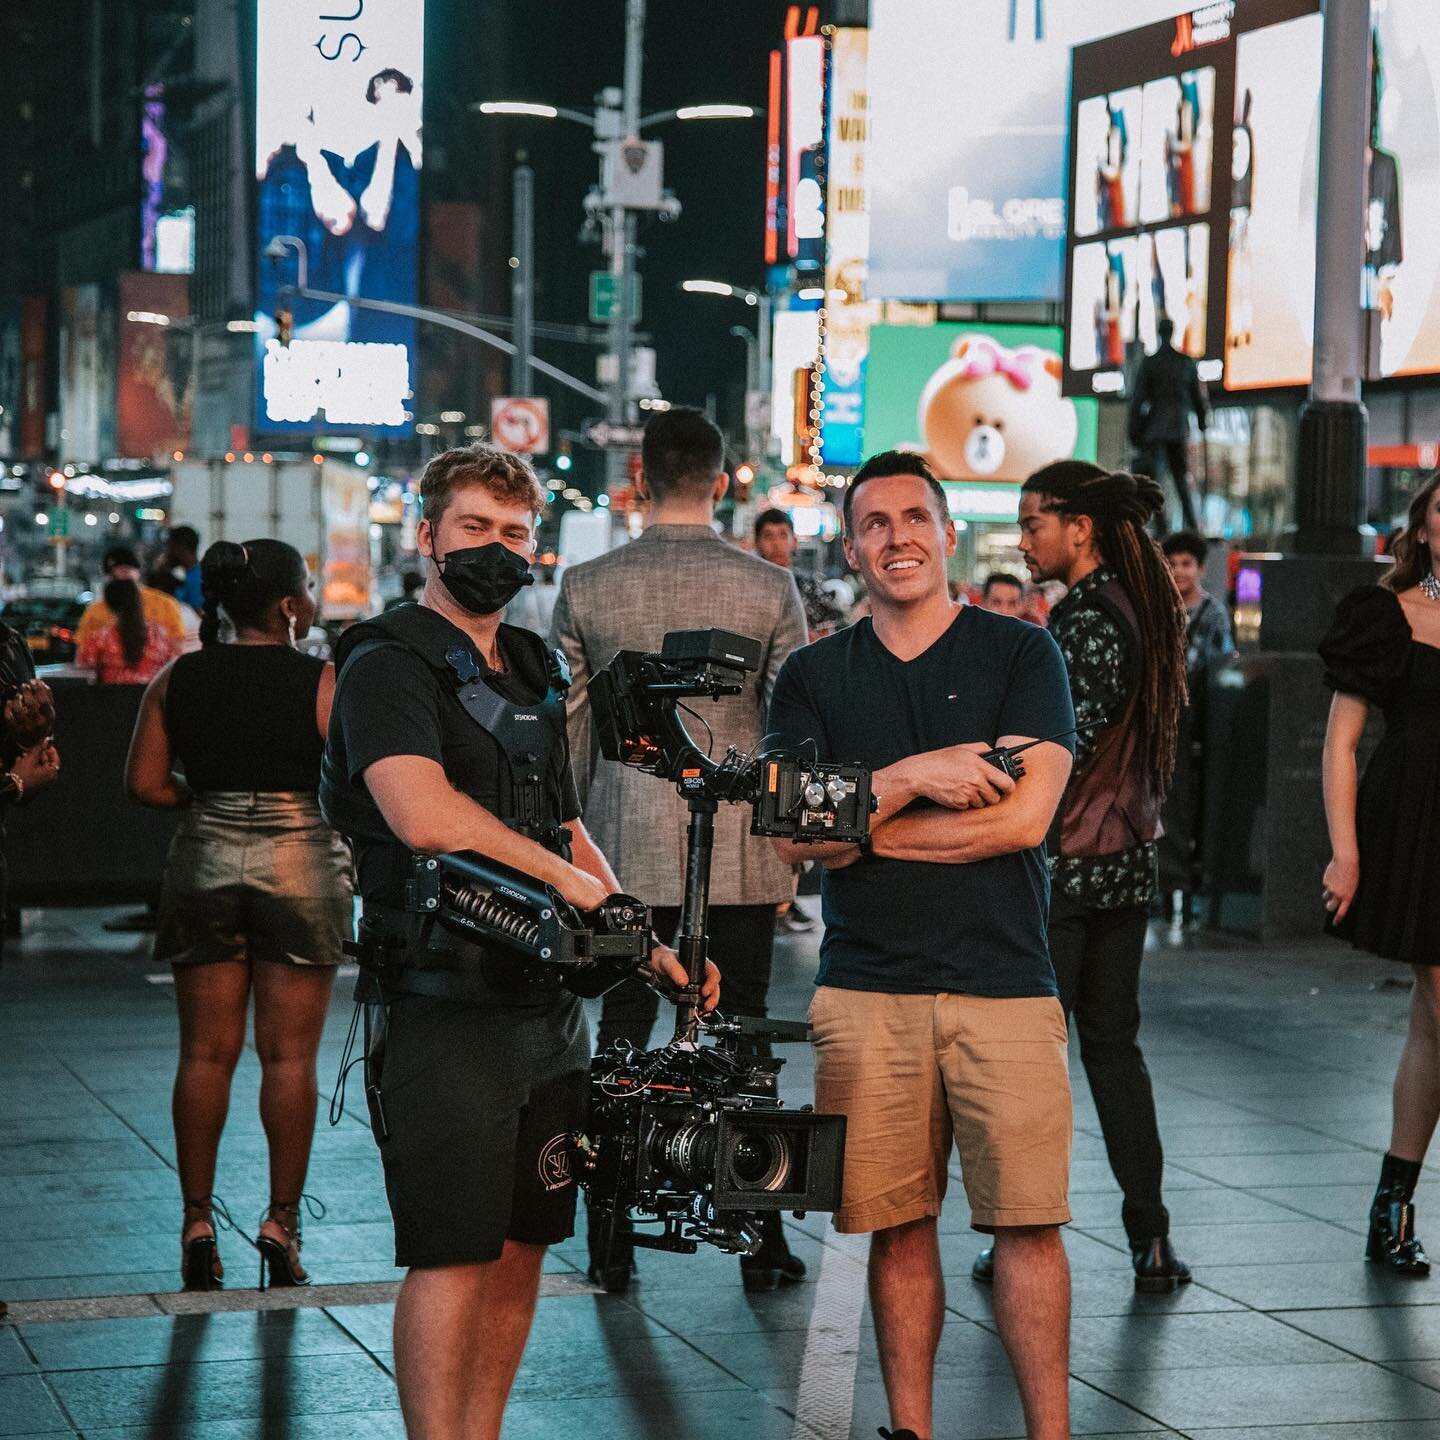 Doing an overnight shoot in Times Square the morning that we left for Italy may not have been ideal but the shots were worth it. Even got @brianmurphyvisuals to fly home in the middle of filming a movie to do some steadicam magic.